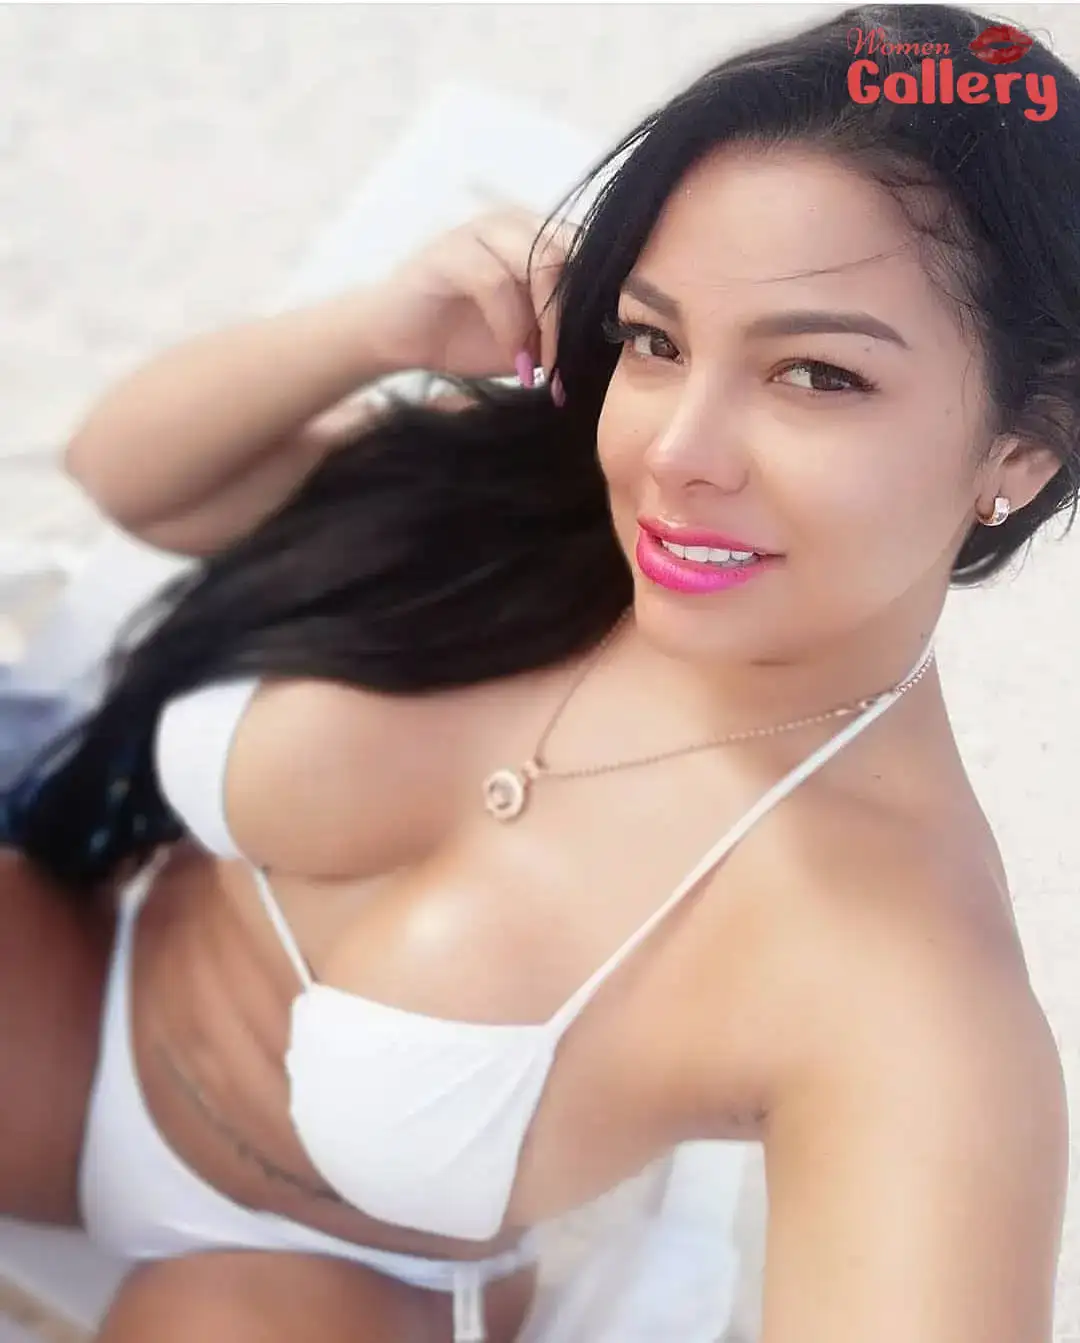 pretty Colombian beauties image